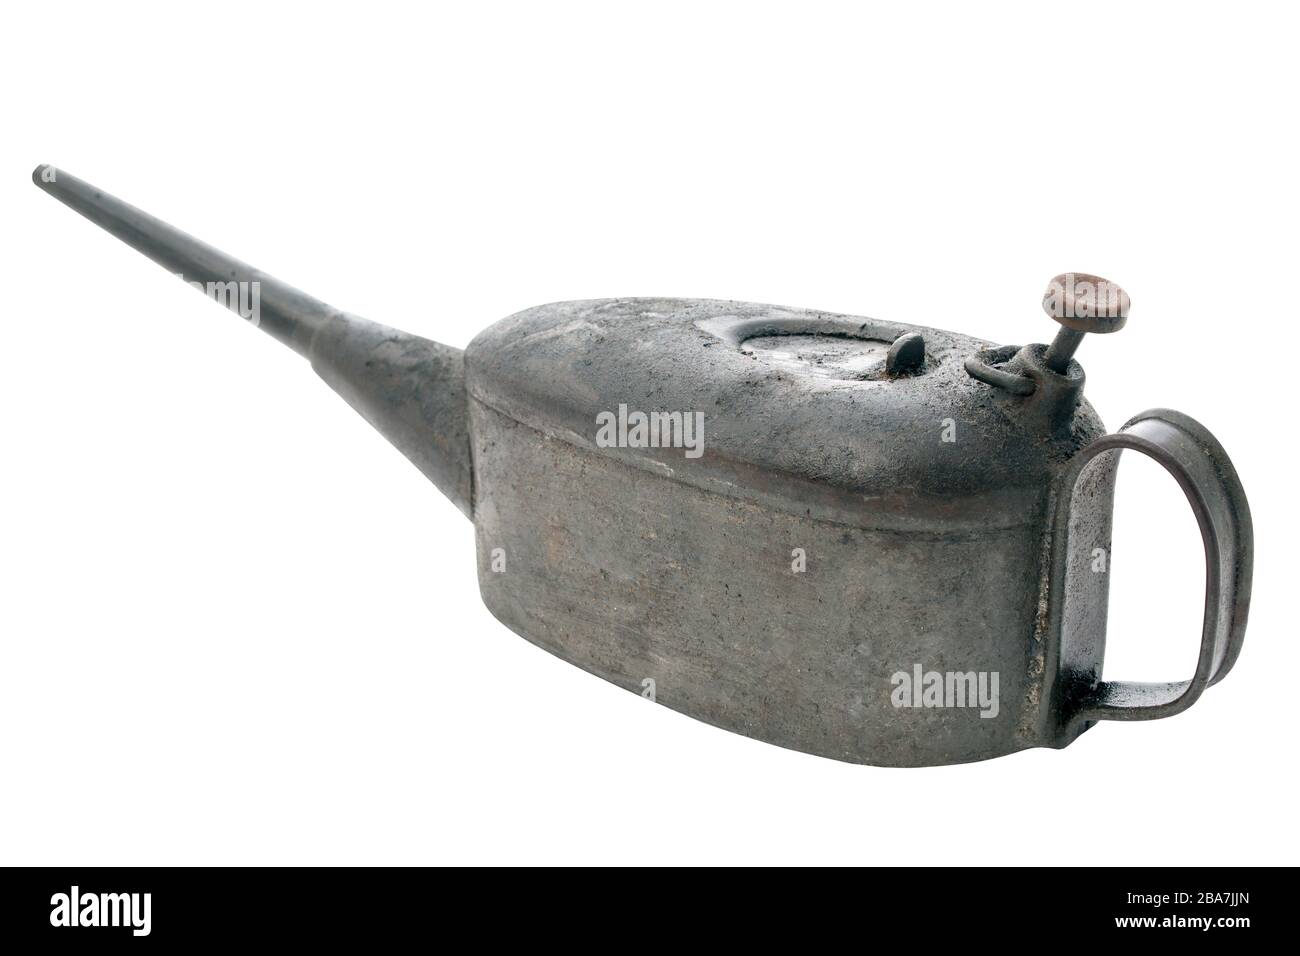 Vintage oil container coated in grease and dust from years of use on an isolated white background with a clipping path Stock Photo